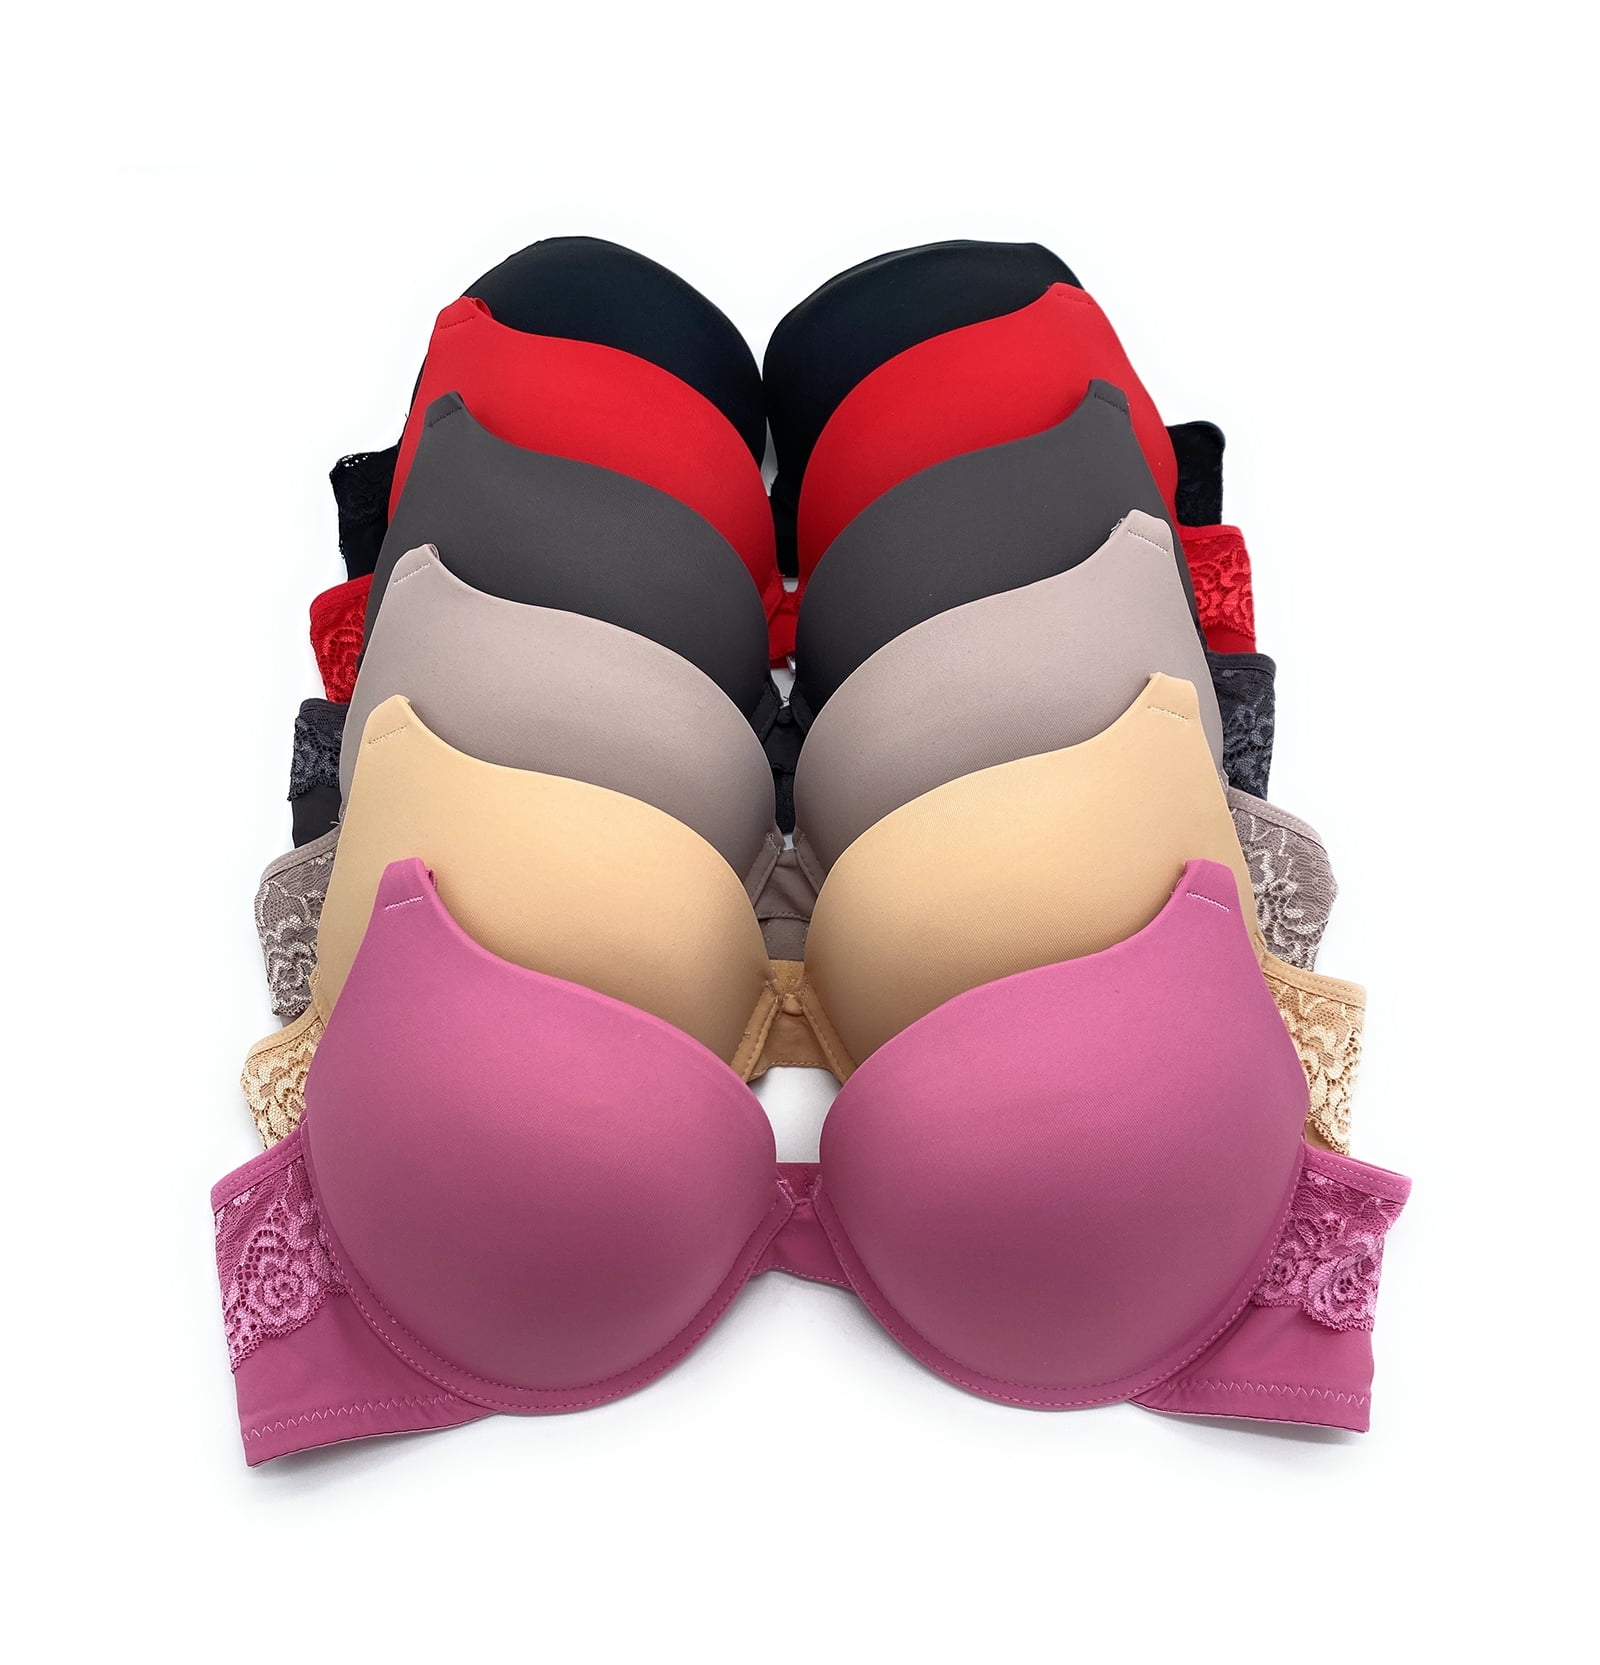 Special offer Meisi counter genuine FC420 push-up adjustable bra thin C cup  D cup big breasts